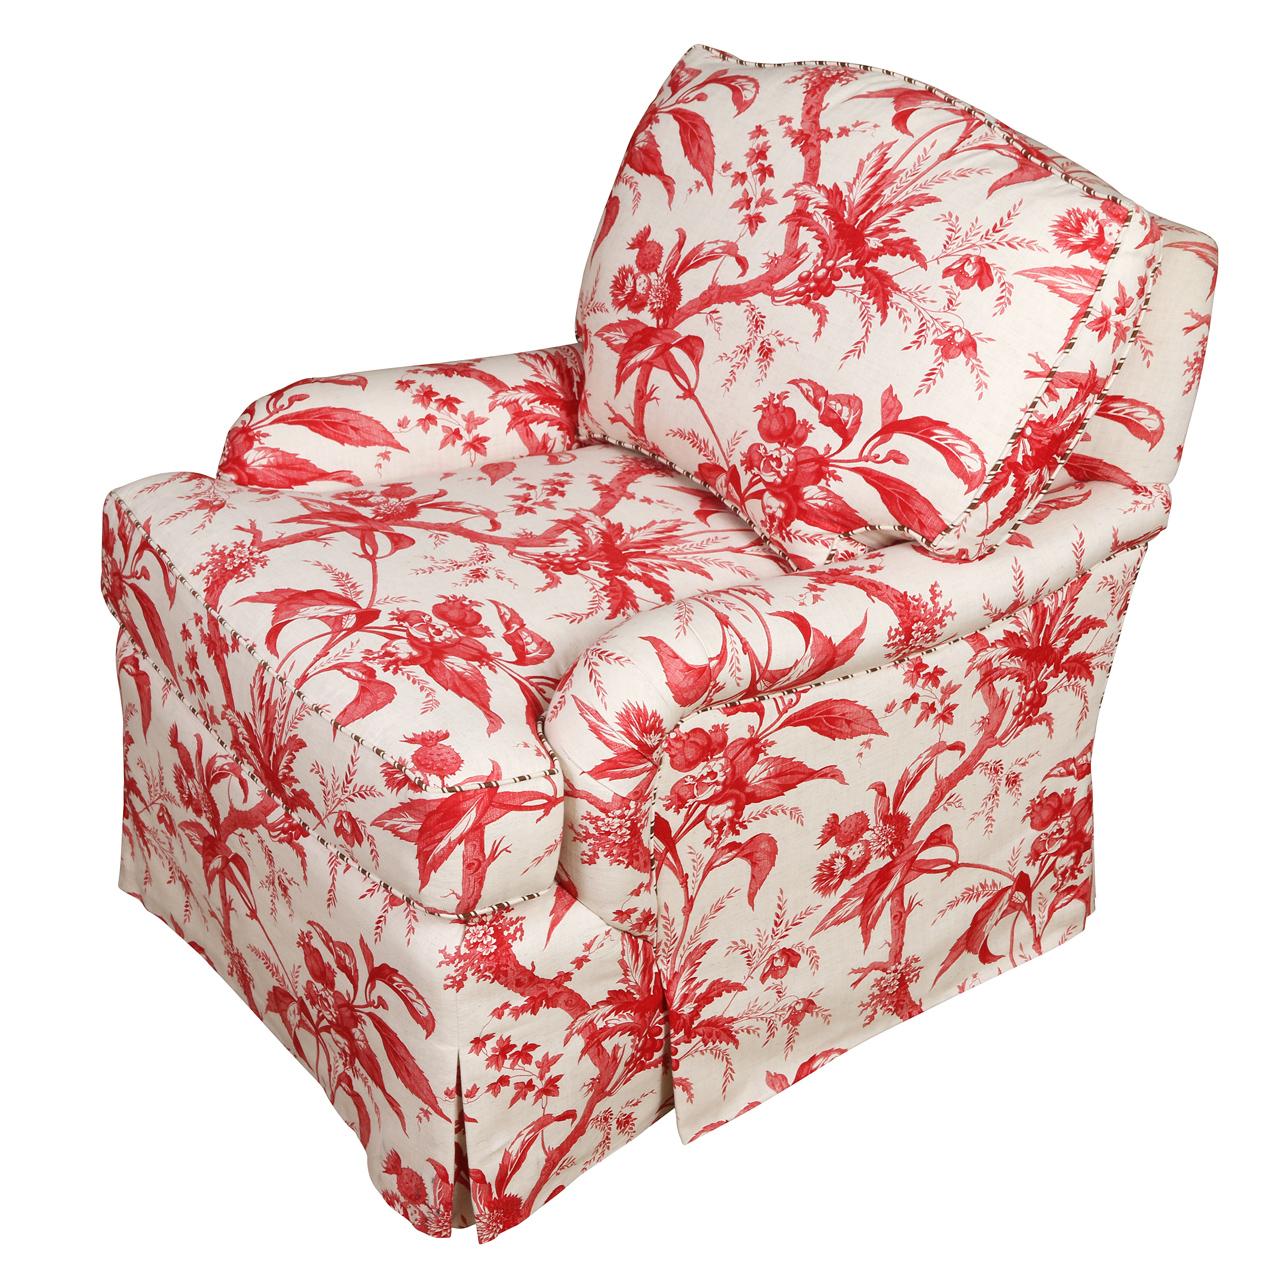 Contemporary A Club Chair in a Red and White Lisa Fine Textile Linen